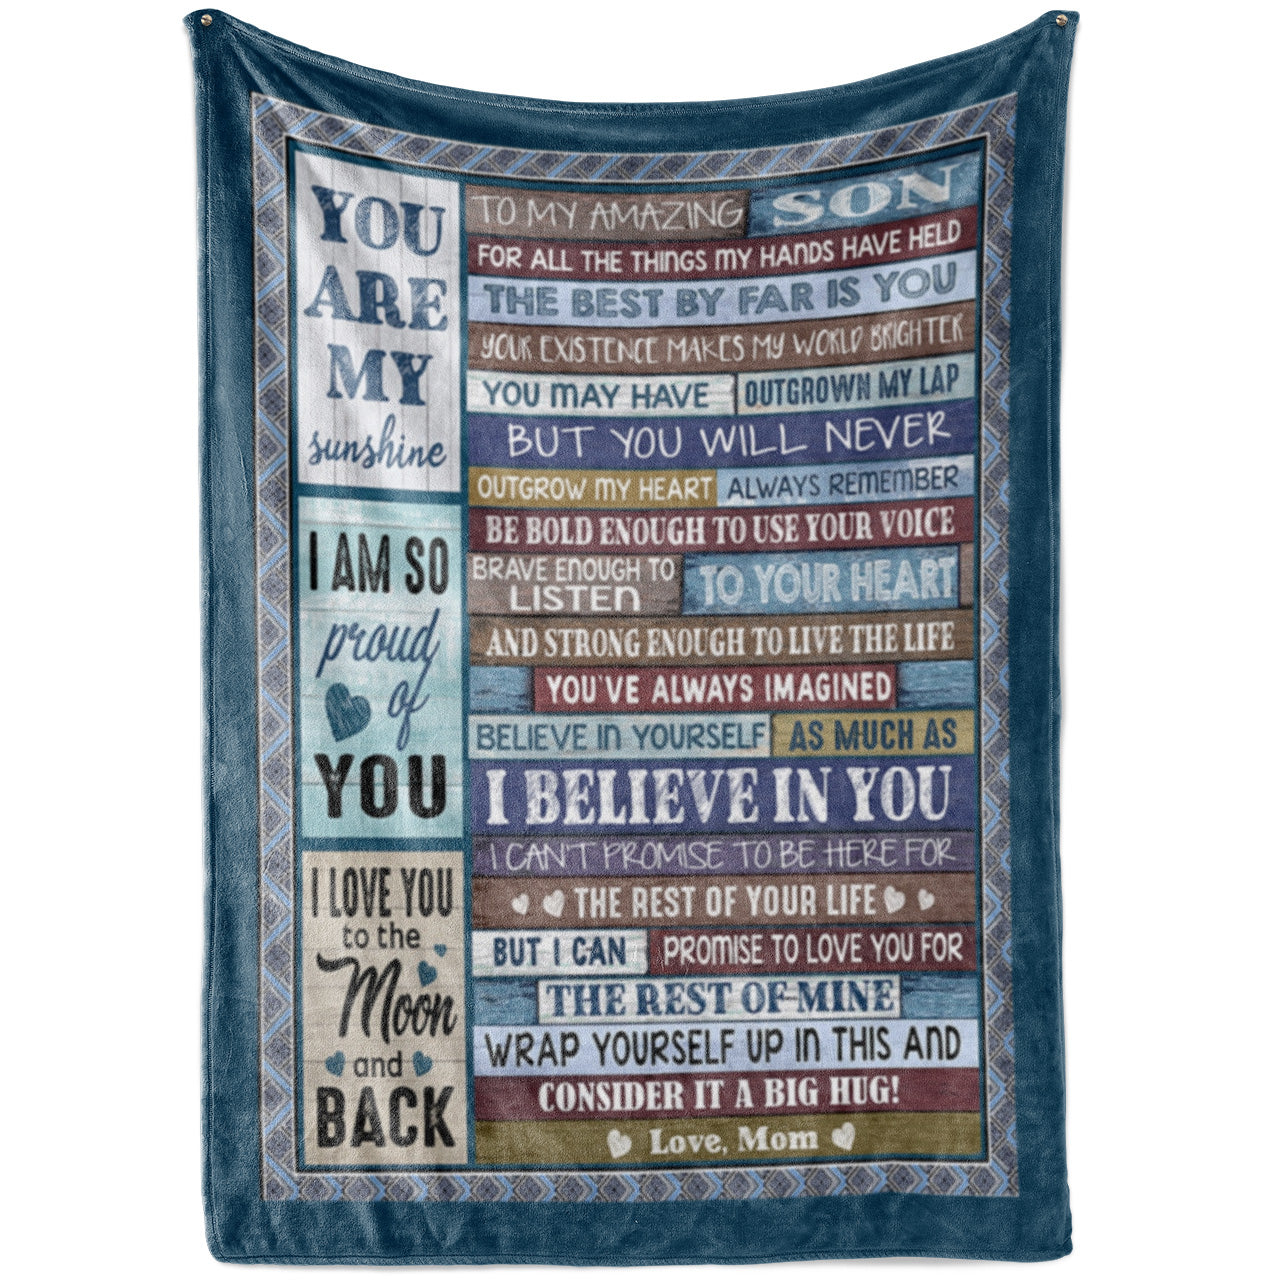 Blanket Gift For Son, Sentimental Gifts For My Son, The Best By Far Is You